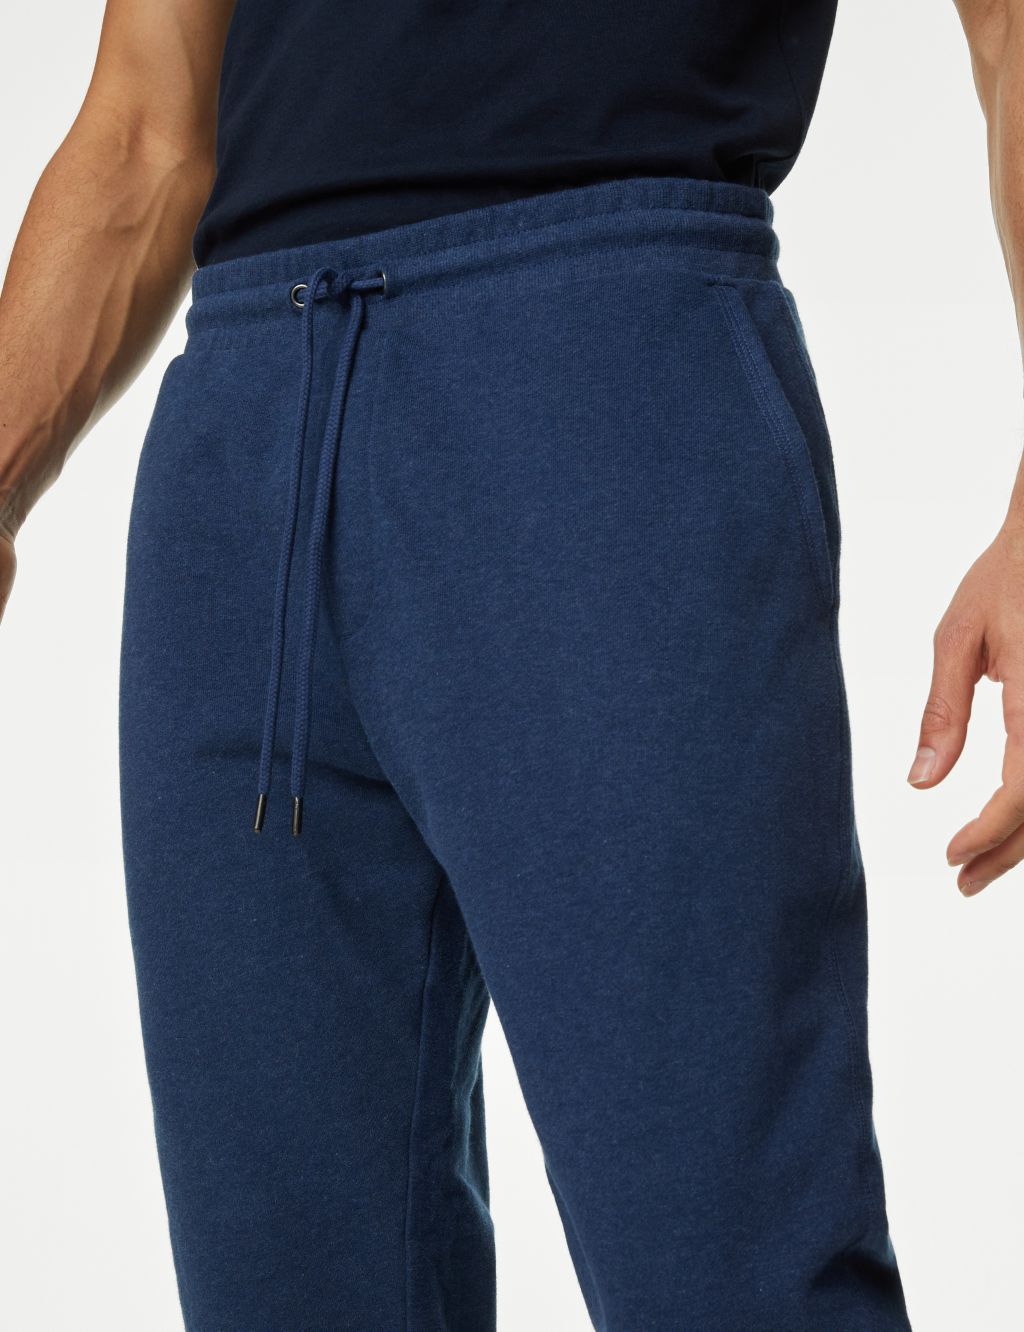 Drawstring Pure Cotton Fleece Lined Joggers image 4